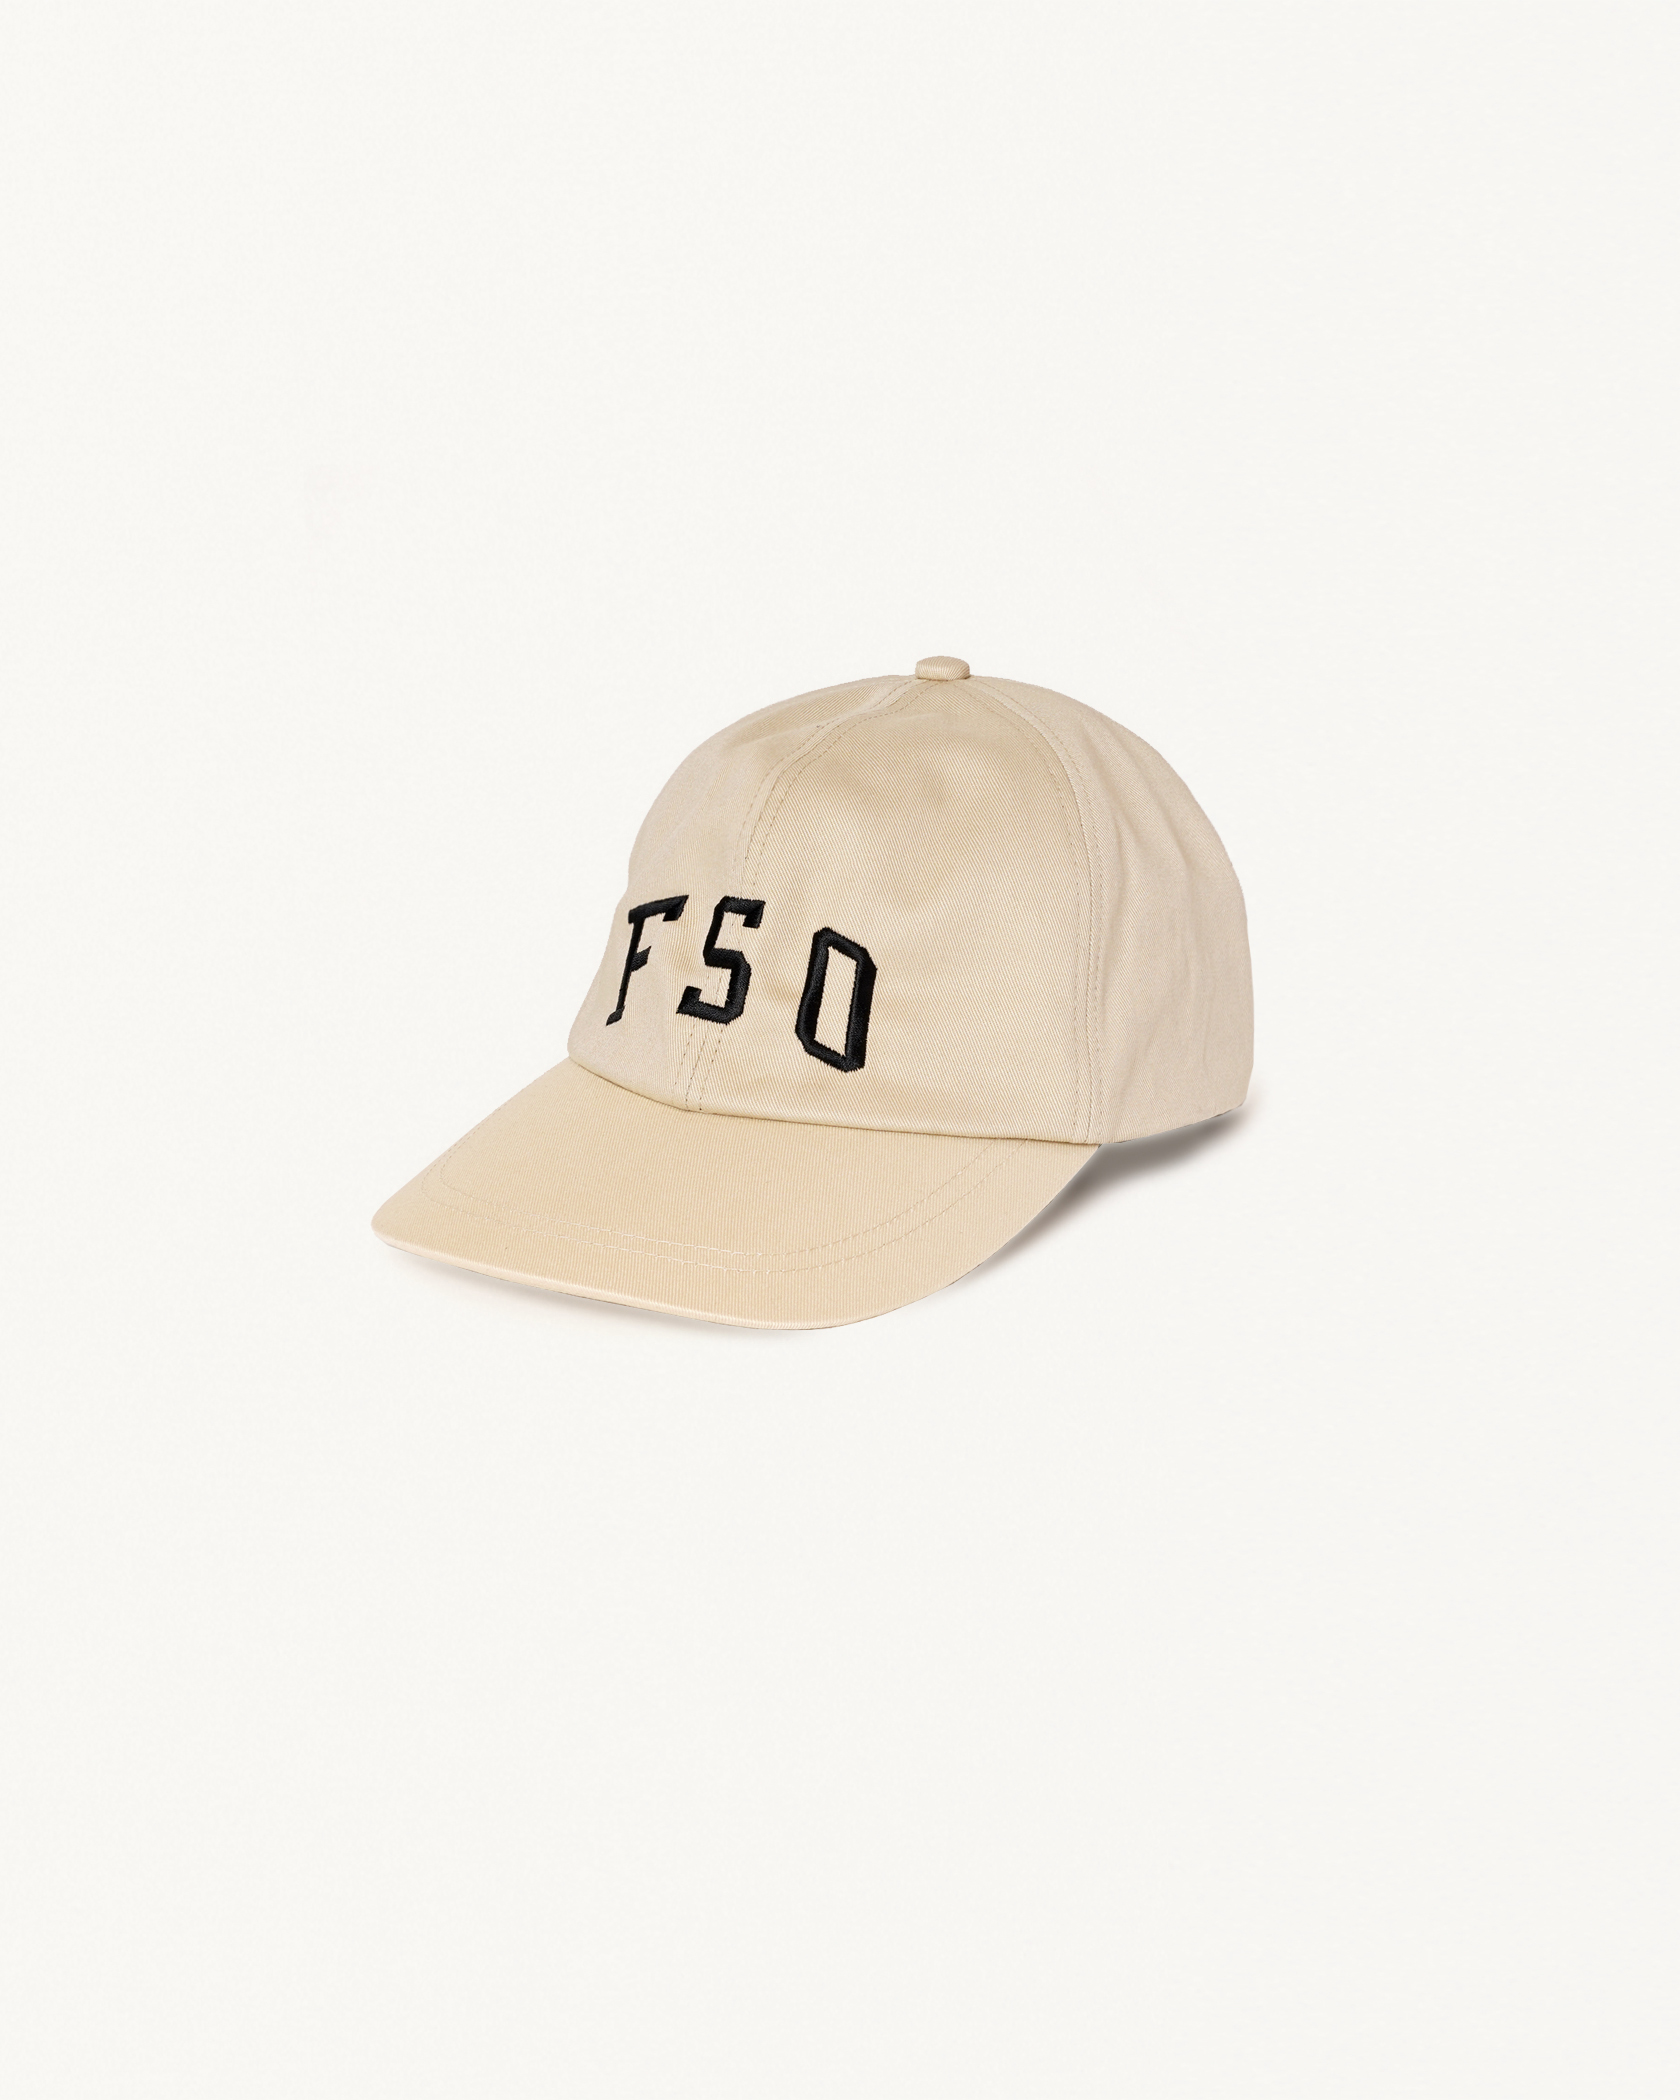 FSO LOGO CAP | FORSOMEONE(フォーサムワン)公式ONLINE STORE